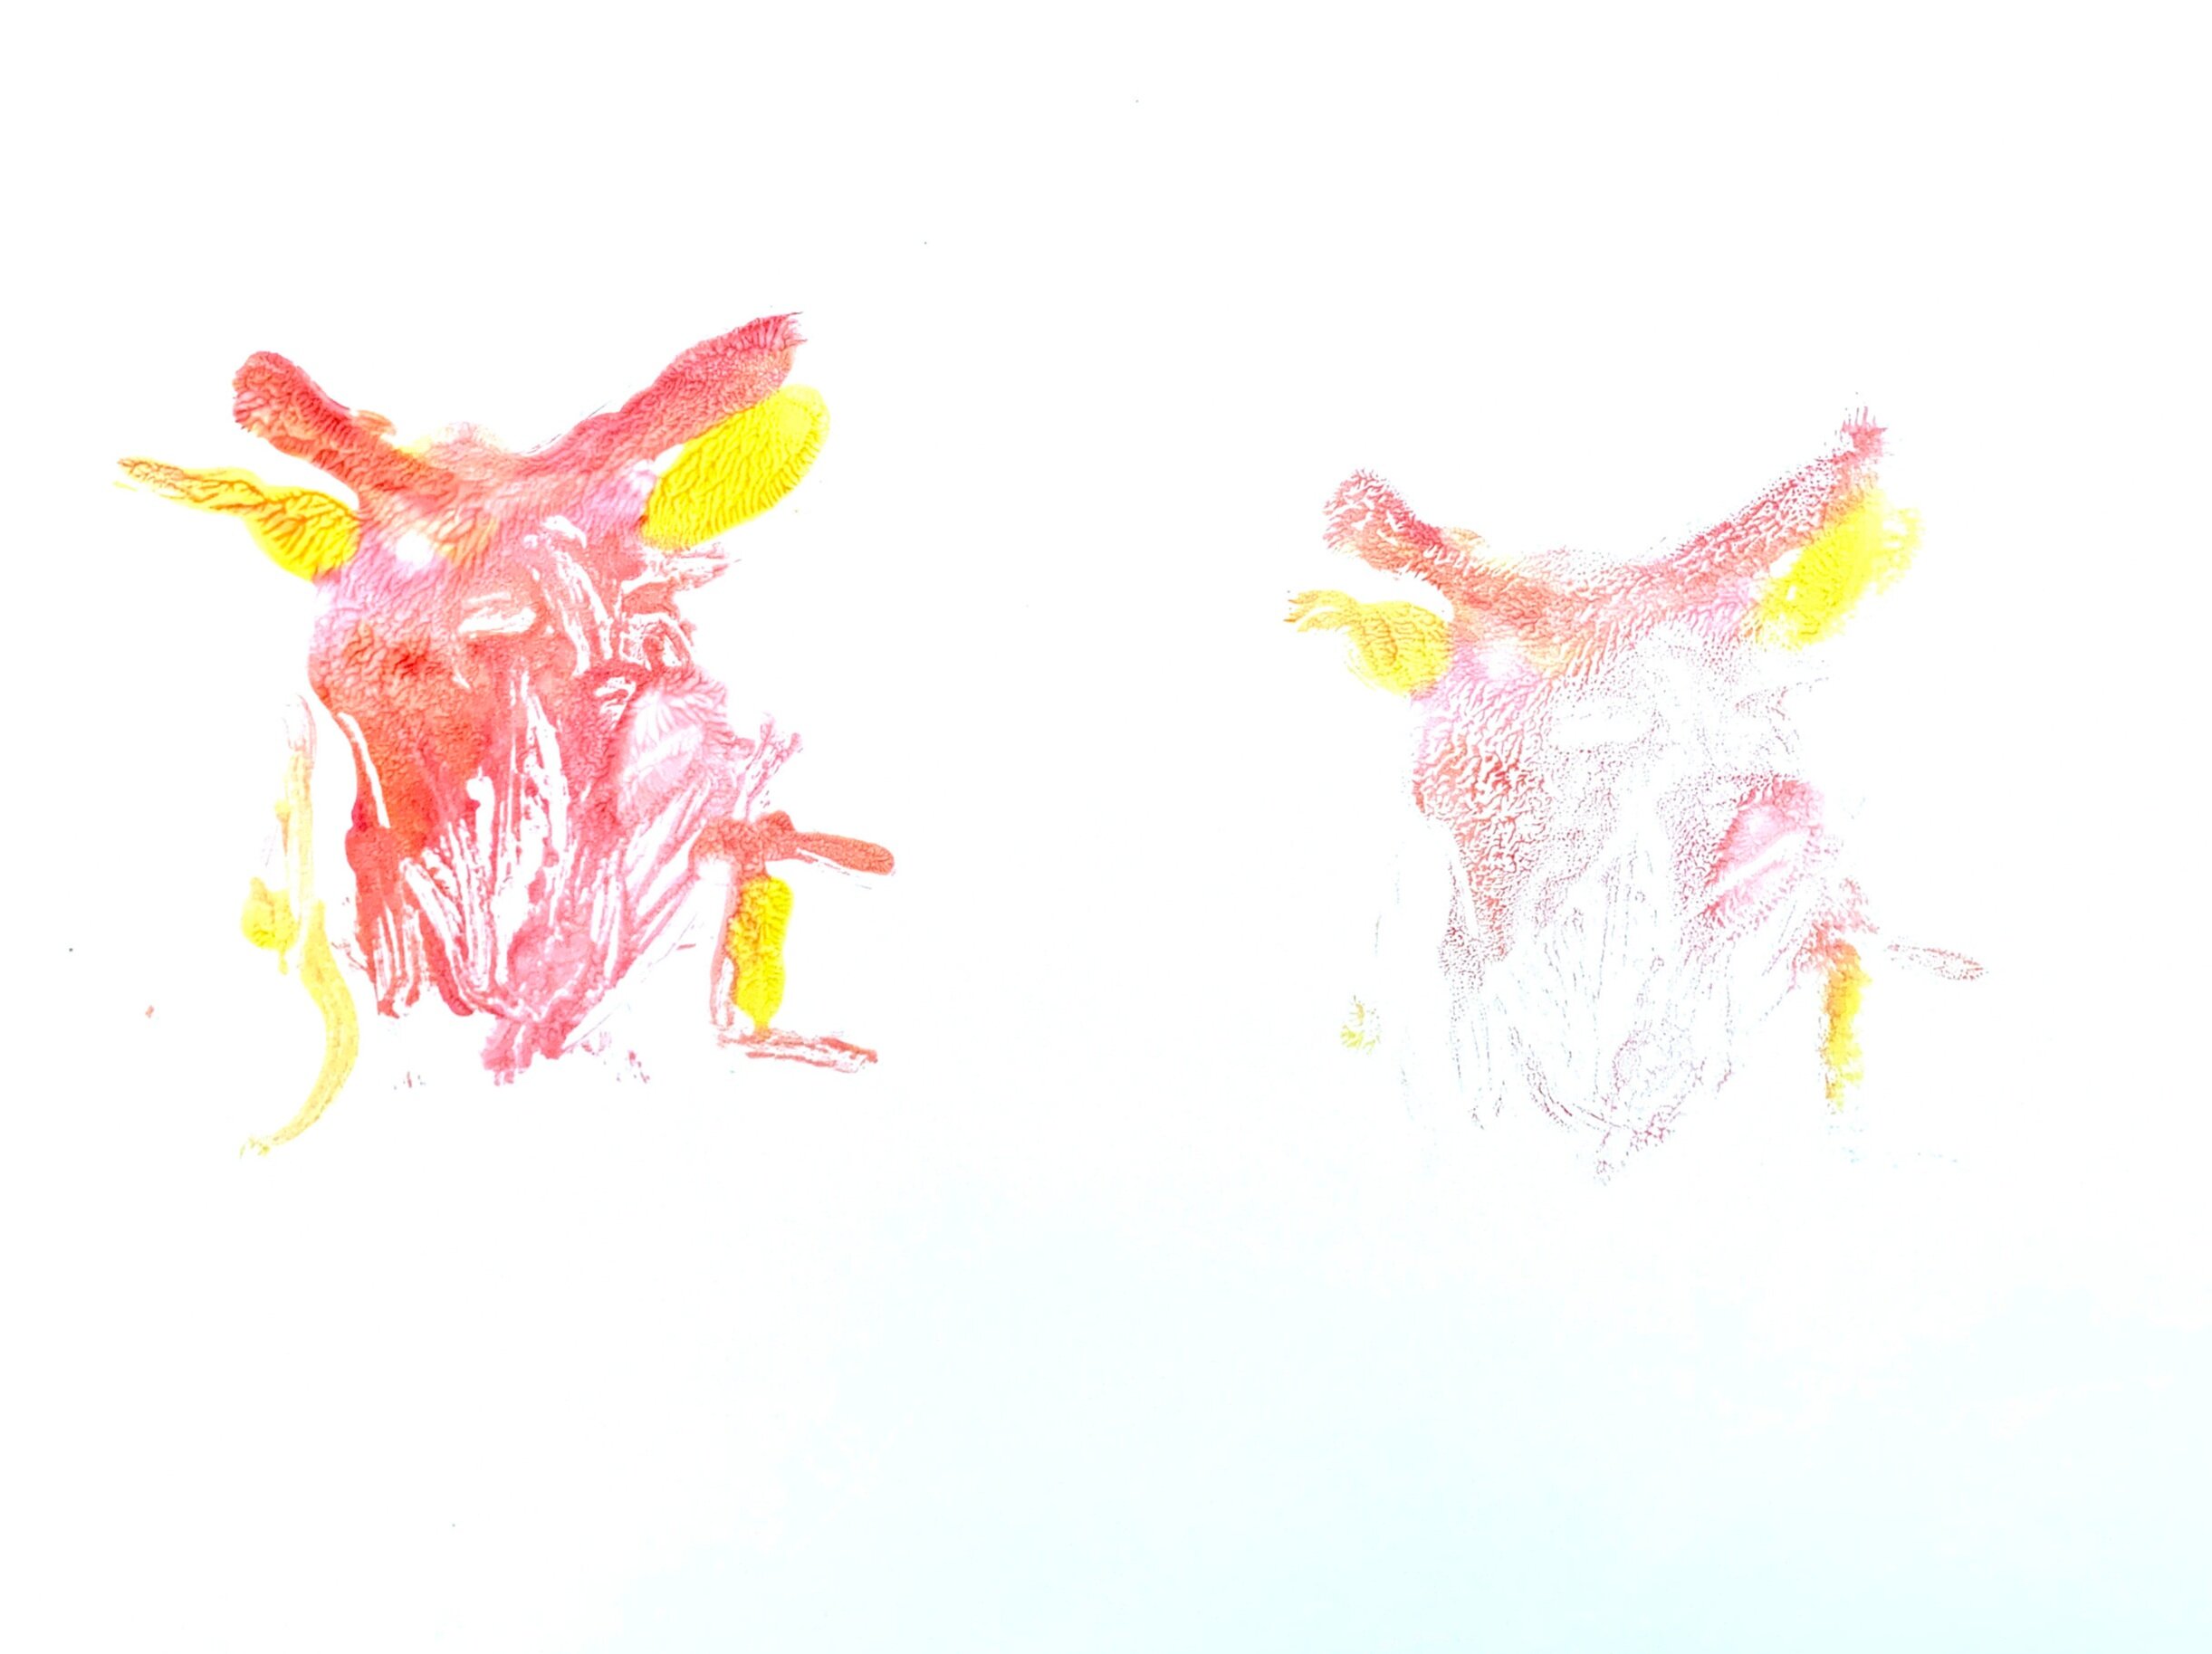 Potato Beetle by Gloria. First and Second Print. February 5, 2020. Tempera print.